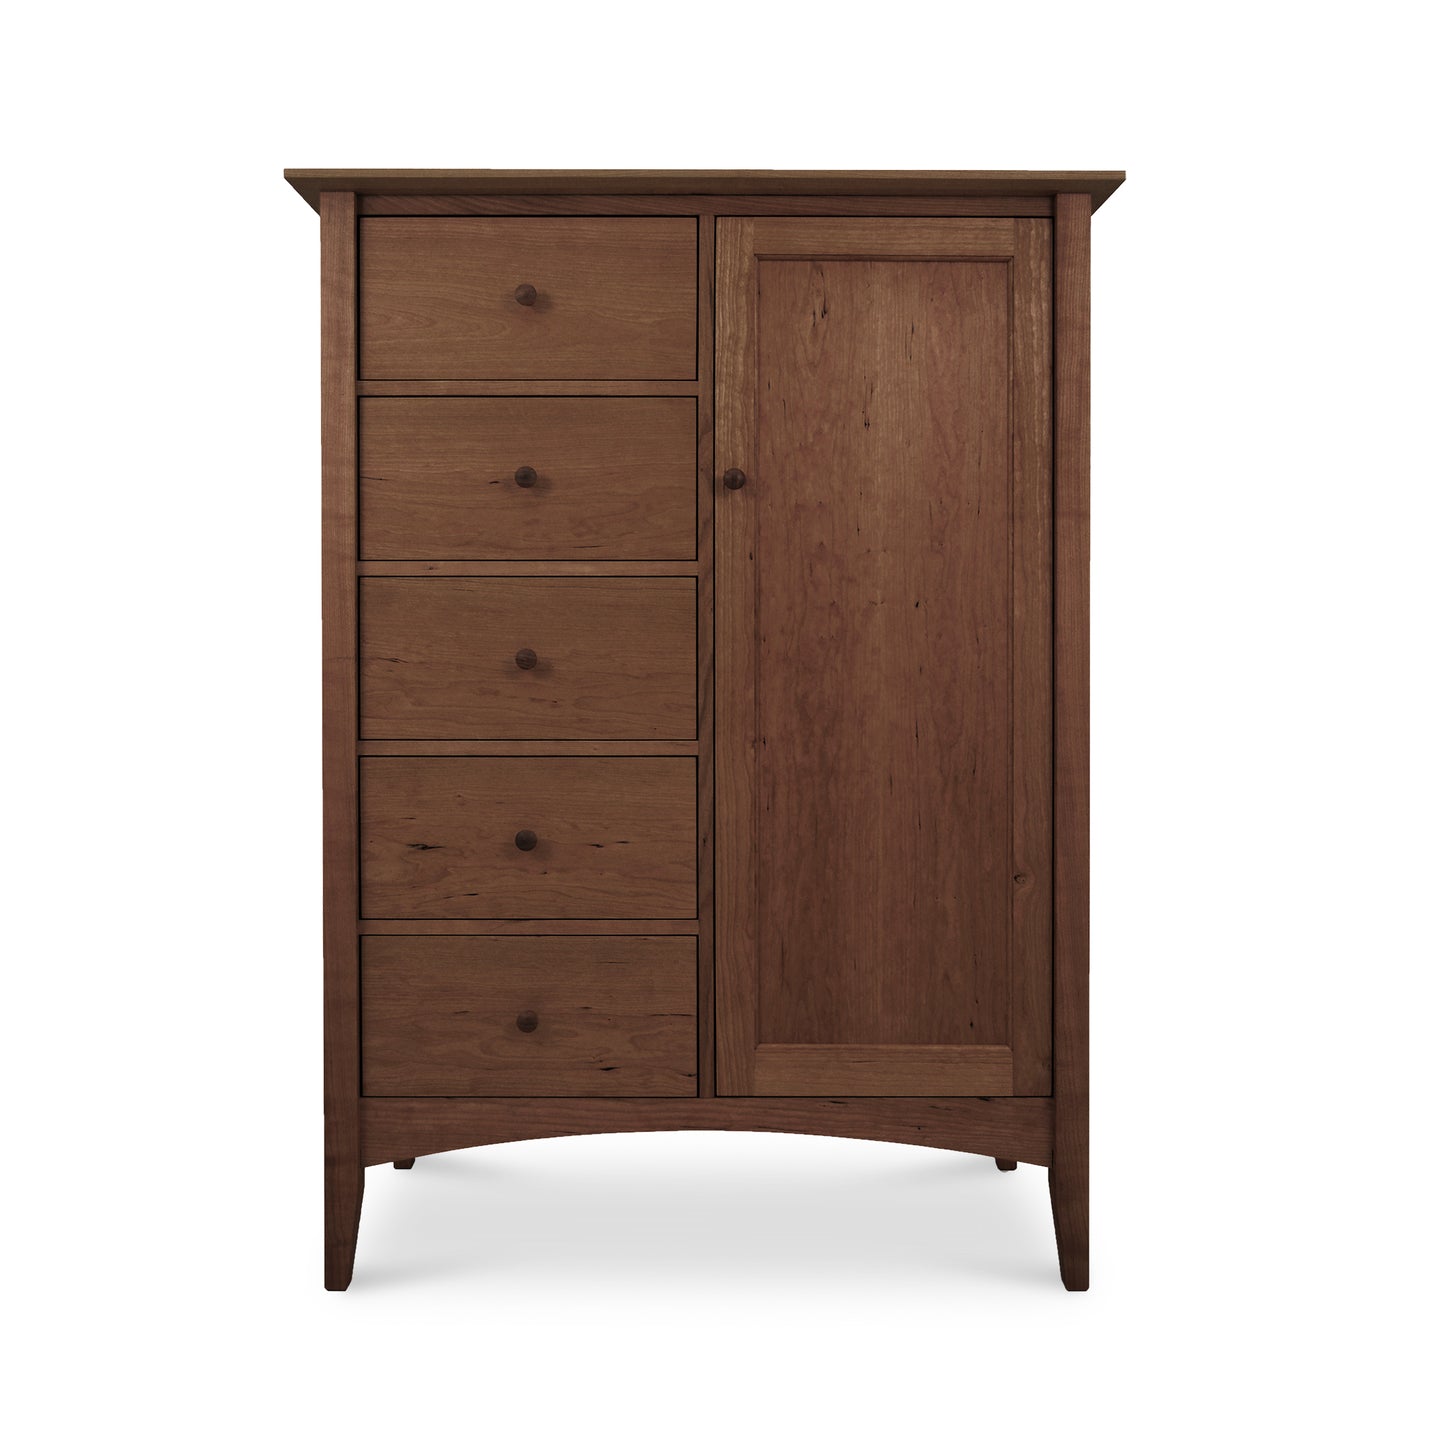 A Maple Corner Woodworks American Shaker Sweater Chest, featuring a combination of five drawers on the left and a single closed door on the right, all set against a plain white background, crafted with Vermont craftsmanship.